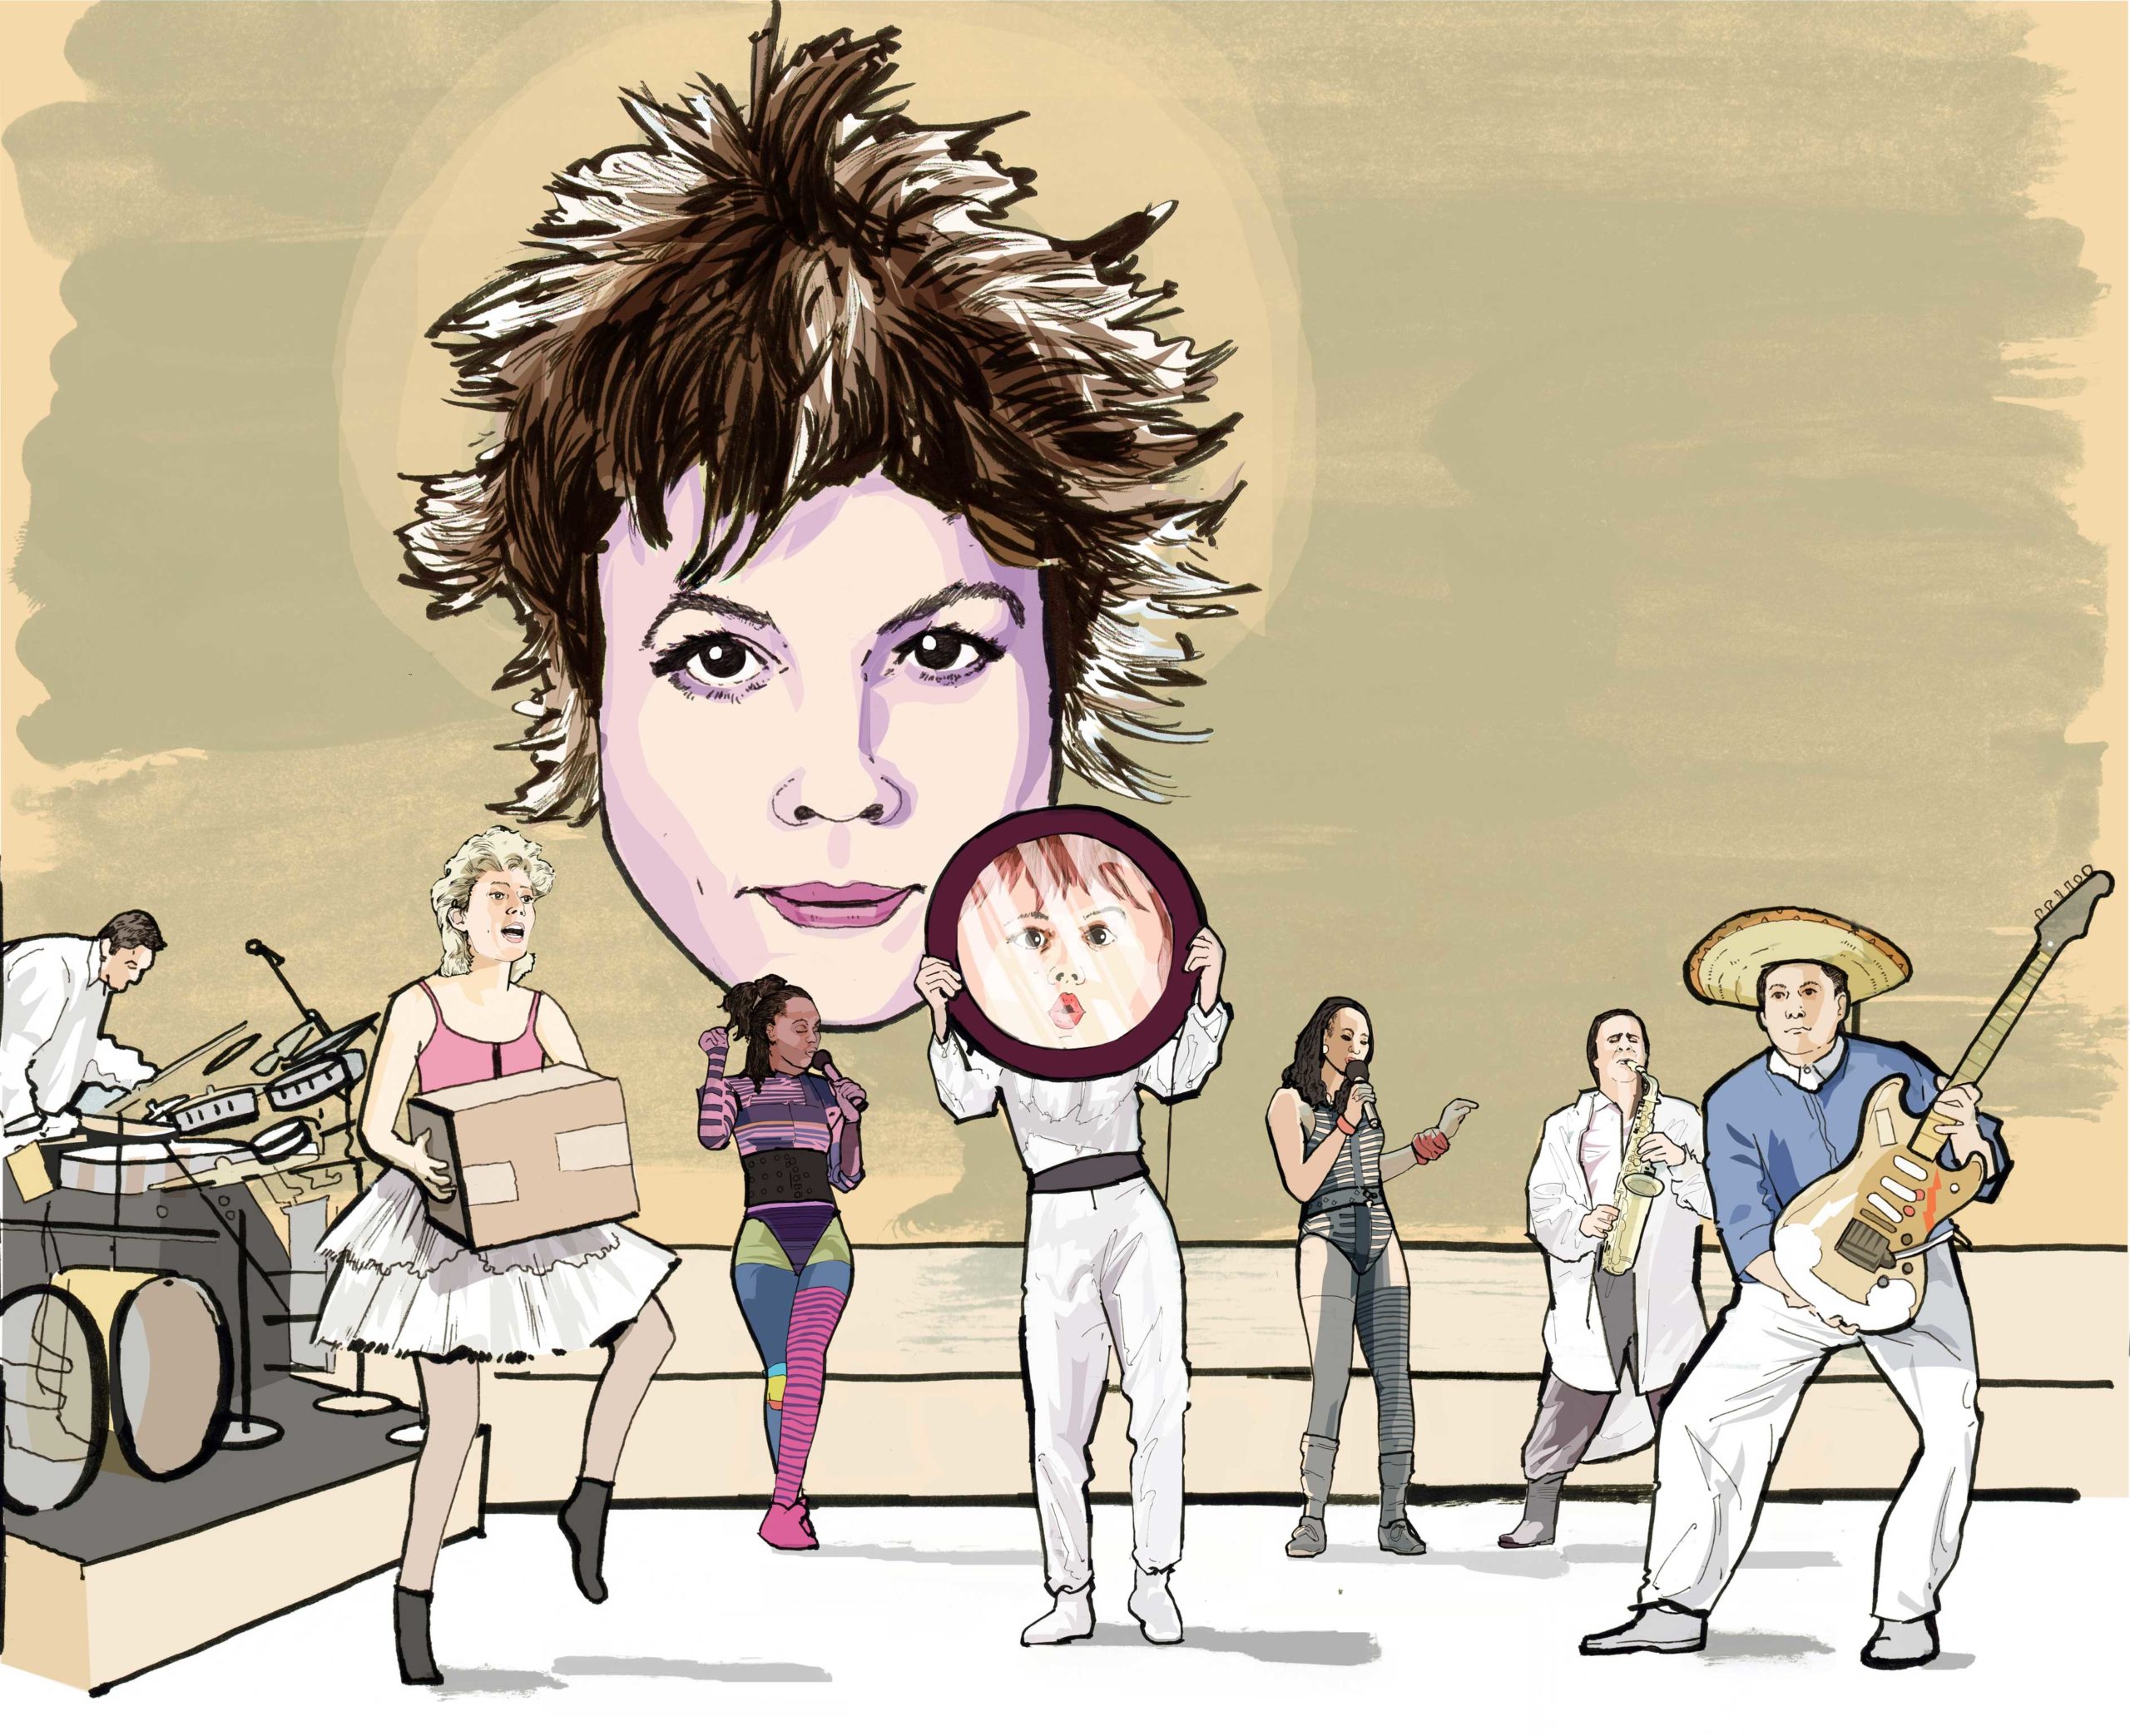 Coming Soon to ALOUD: Laurie Anderson